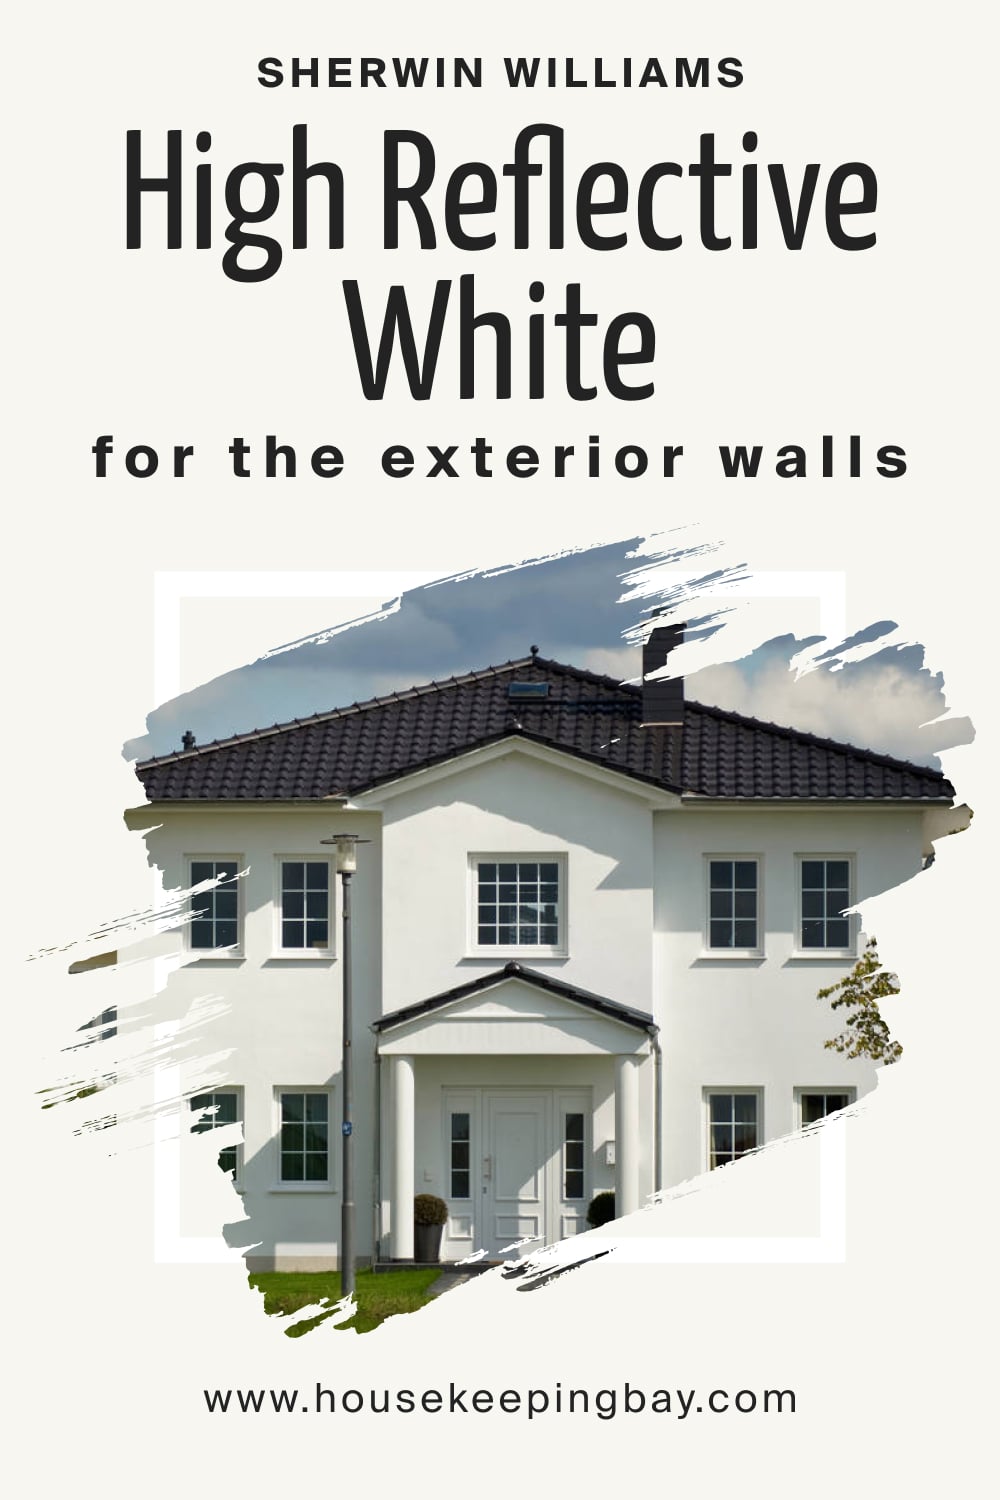 Sherwin Williams. High Reflective White SW 7757 For the exterior walls